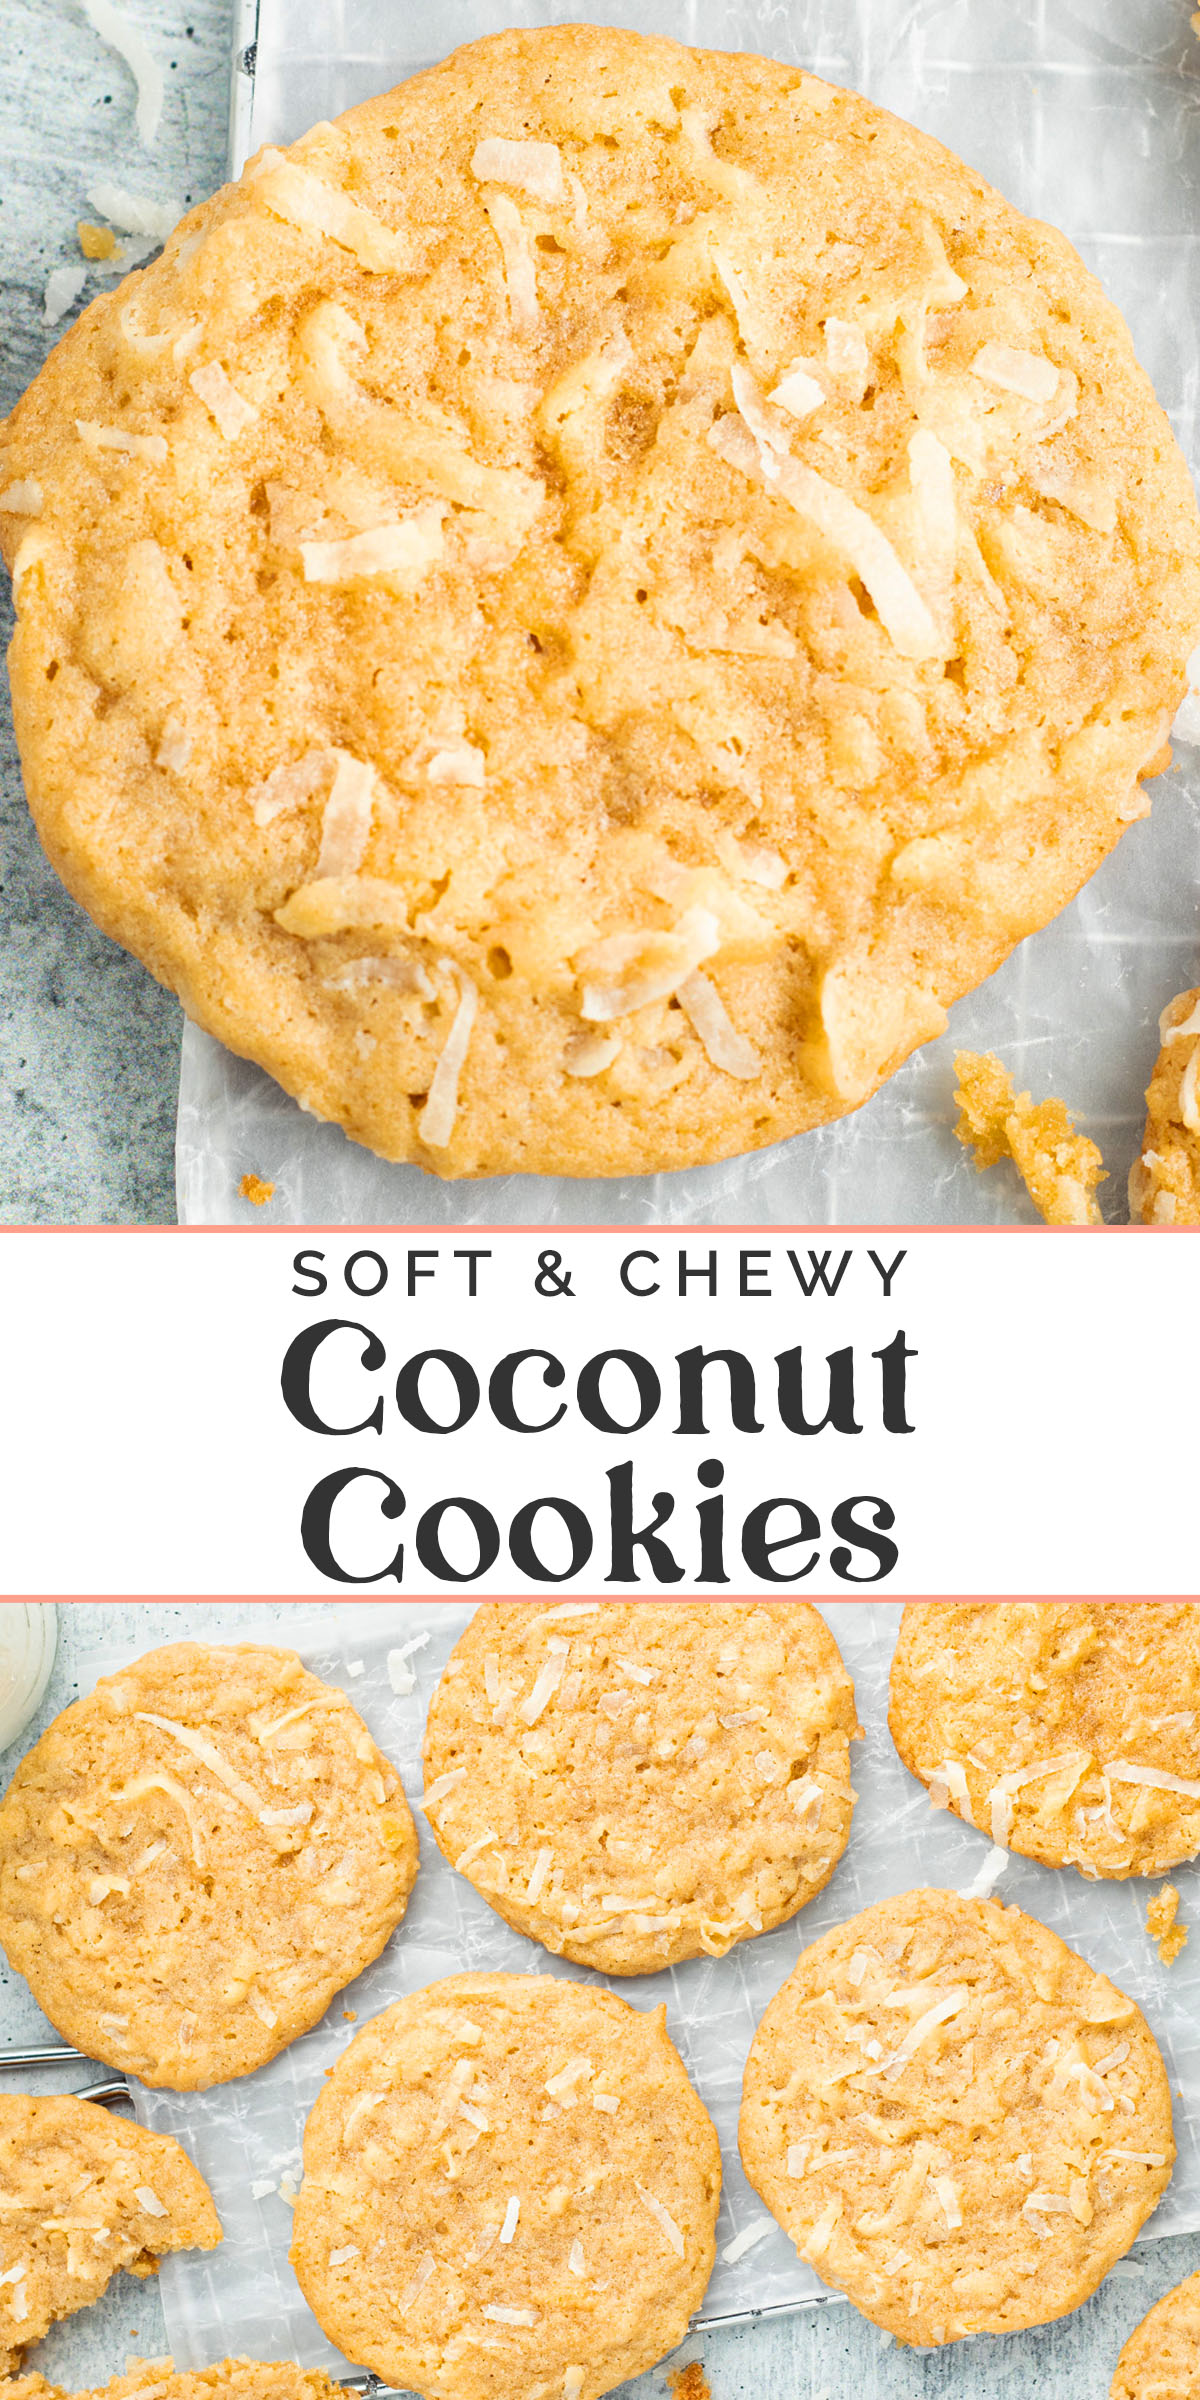 Pin graphic for coconut cookies.